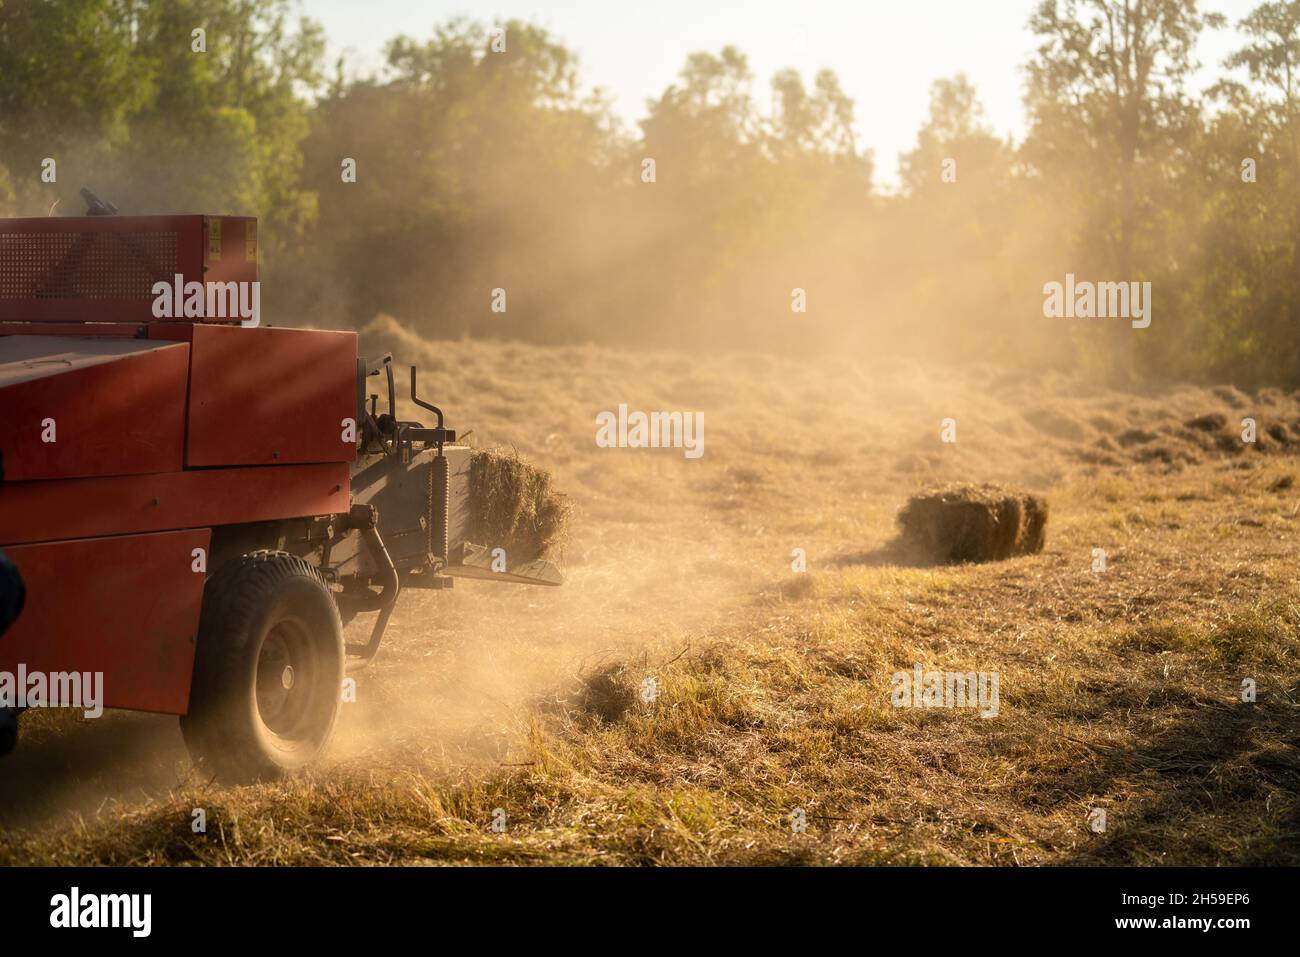 Grass harvesting machinery. forage harvester cutting pangola grass silage crop in field. Agriculture. Stock Photo